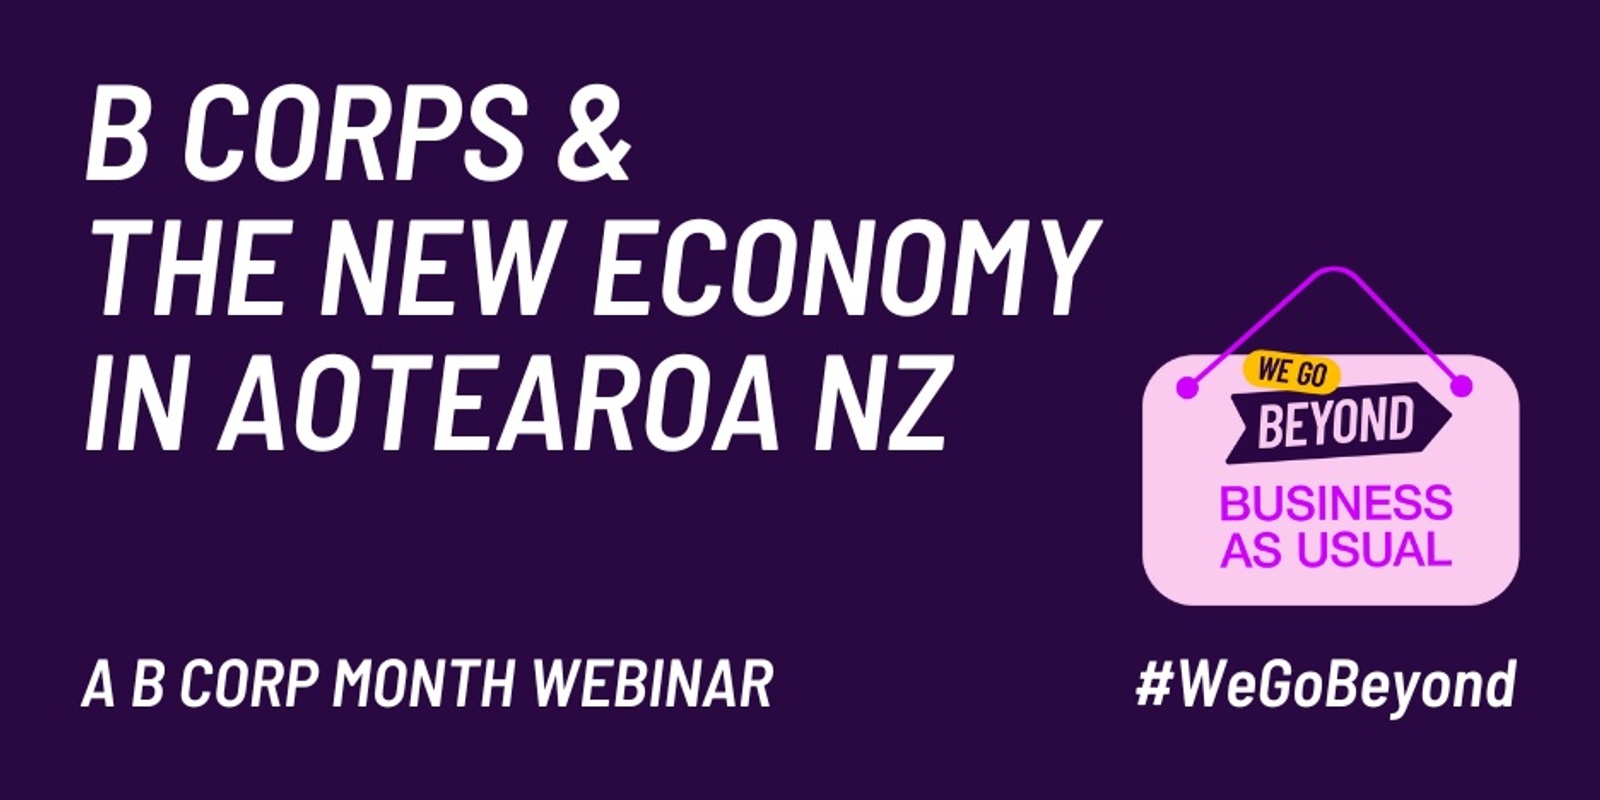 Banner image for B Corps & The New Economy in Aotearoa NZ